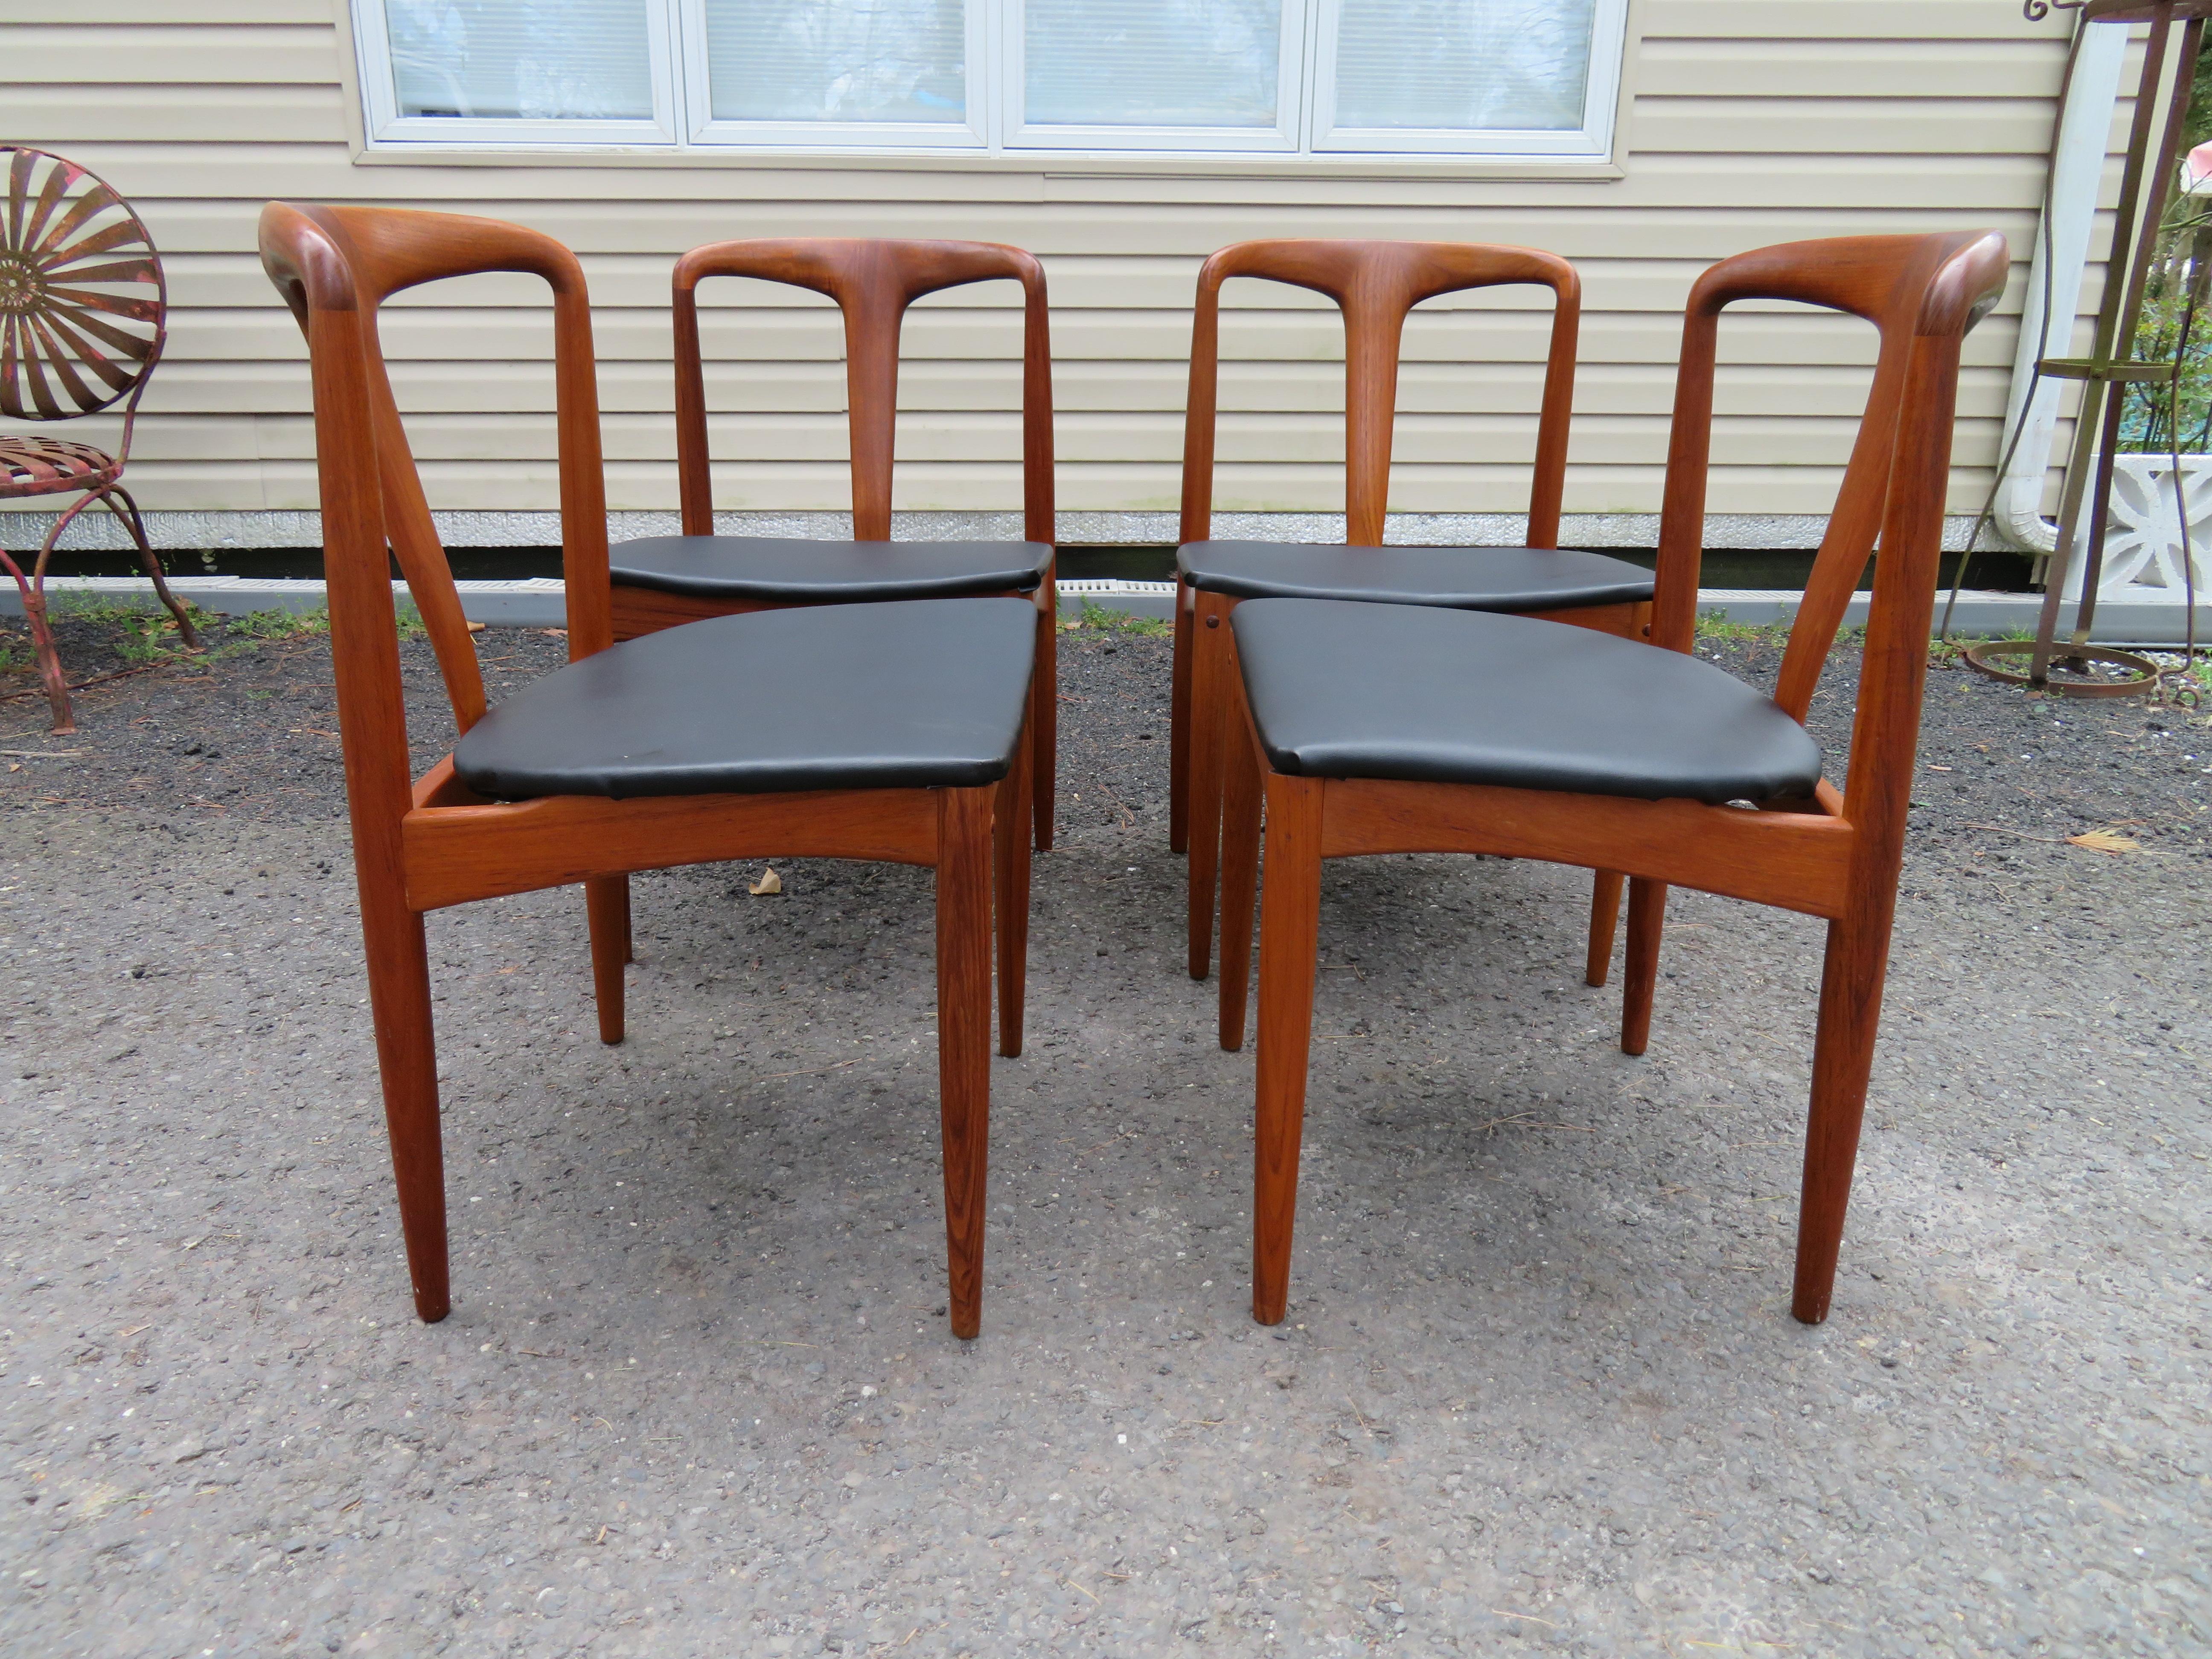 An exceptional set of four mid-century Danish modern 